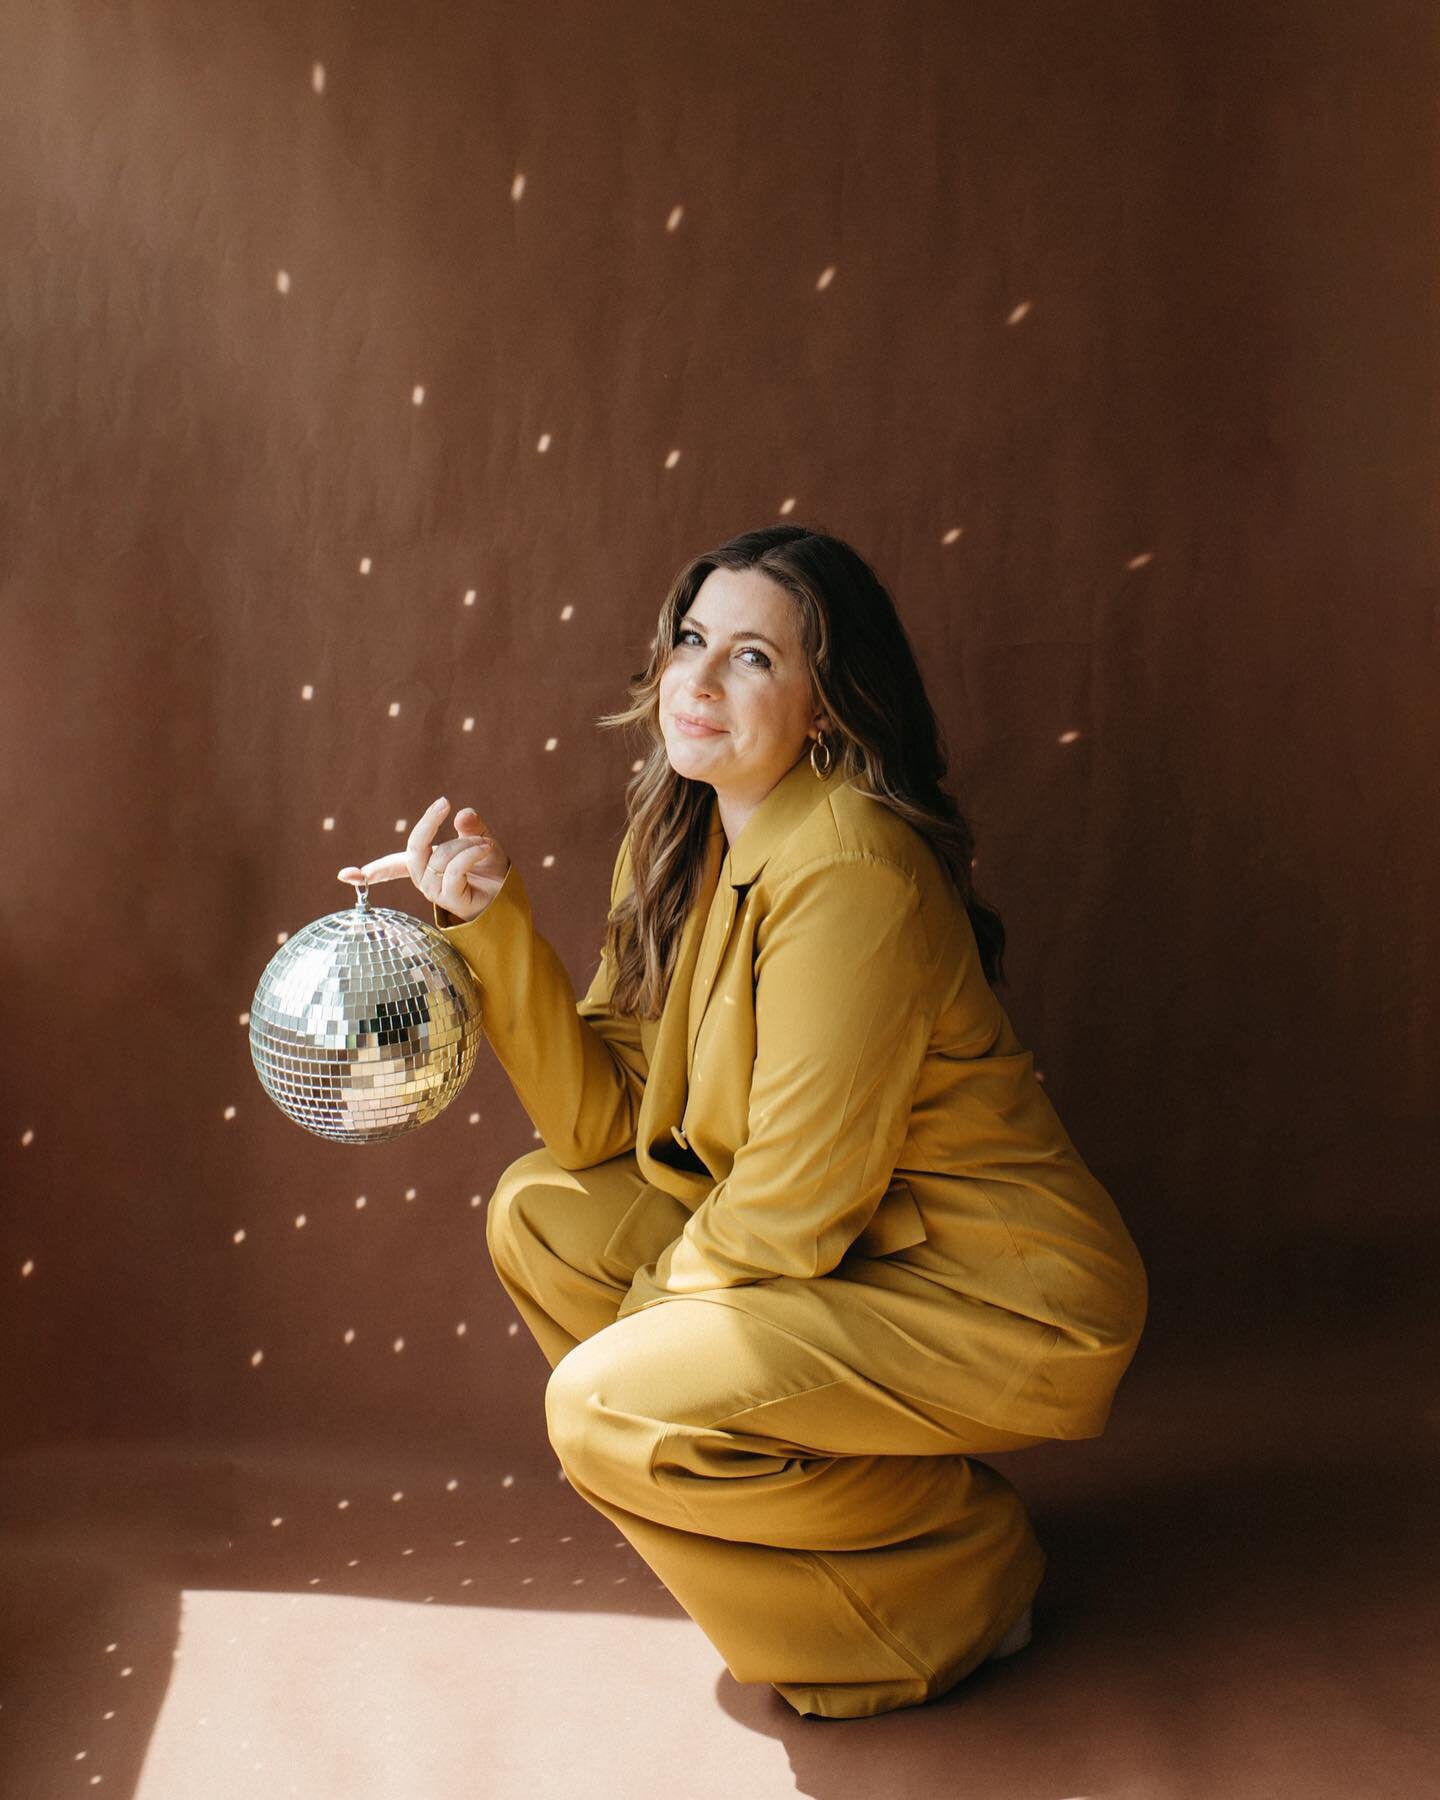 sometimes you just need to add a little sparkle to your day and have a photoshoot in your dining room ✨ #freckledfoxphotography #photobackdrop #paperbackdrop #discoball #sparkle #athome #suit #powersuit #girlboss #arkansas #arkansasphotographer #arka